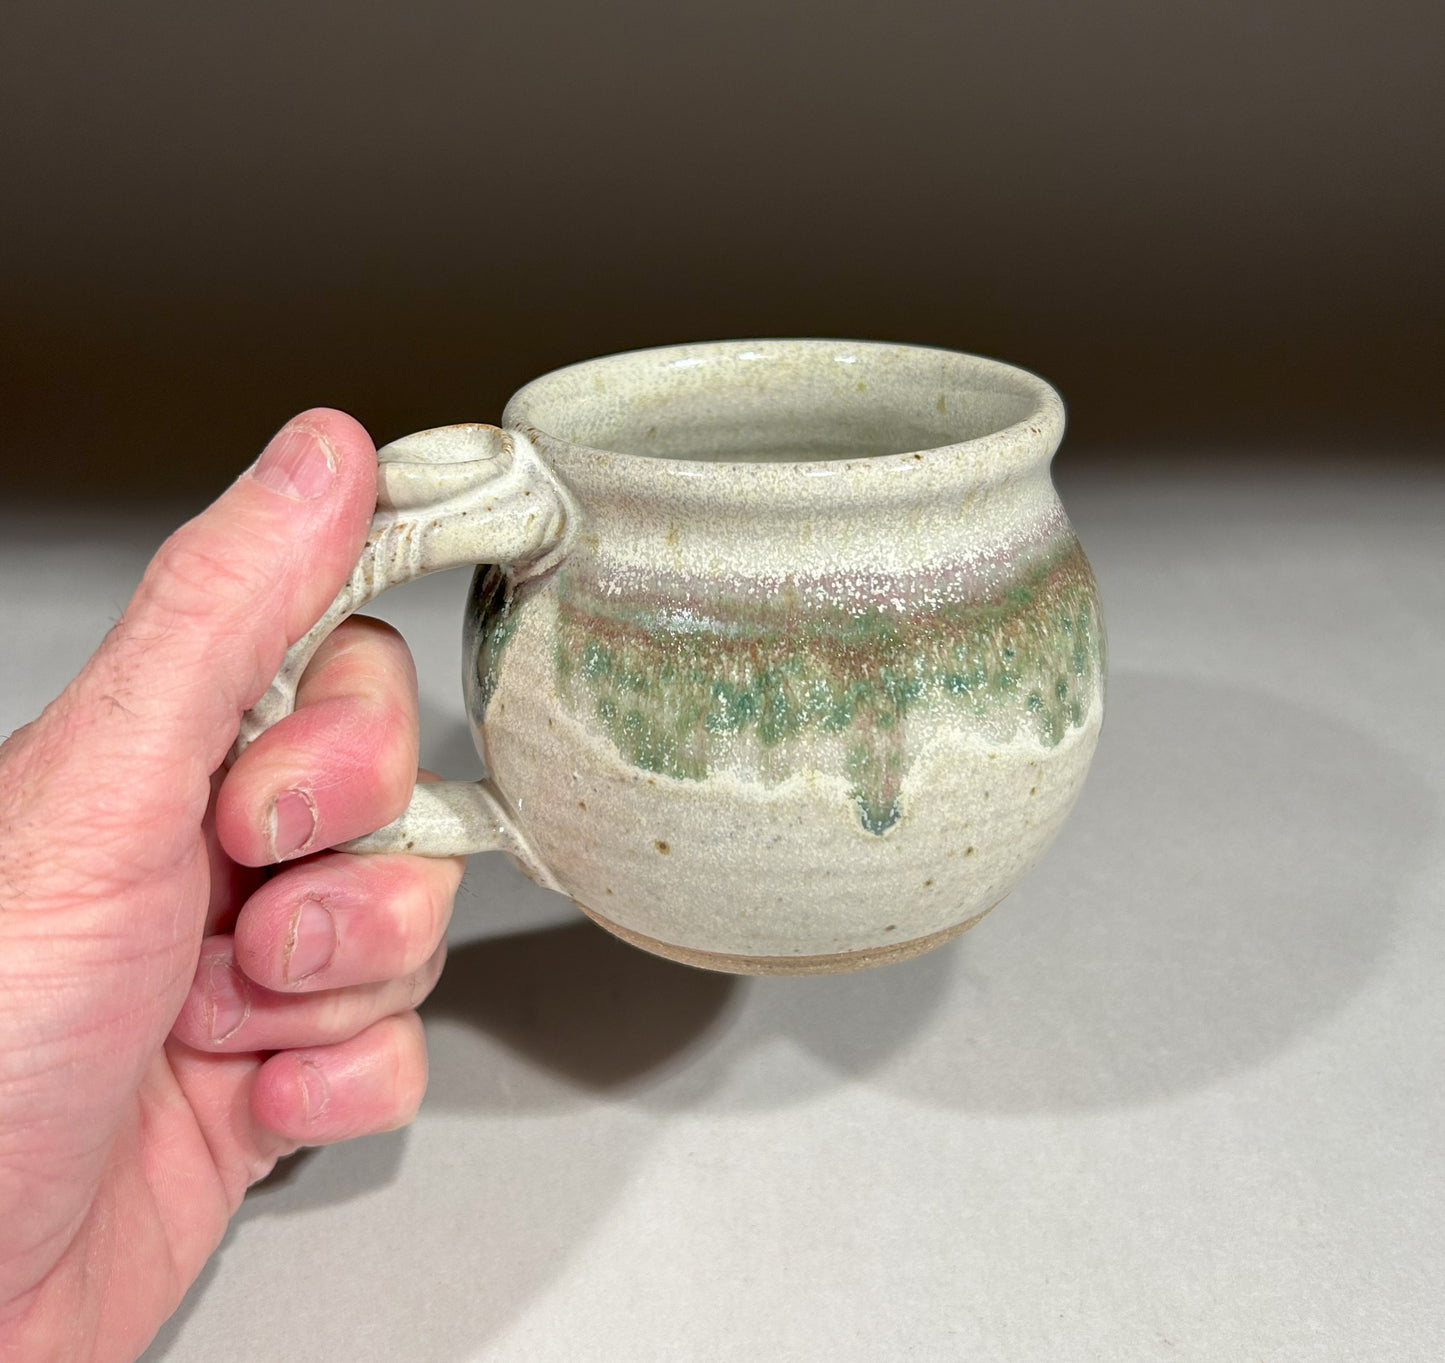 Round Pottery mug - Fits perfect in your hand.